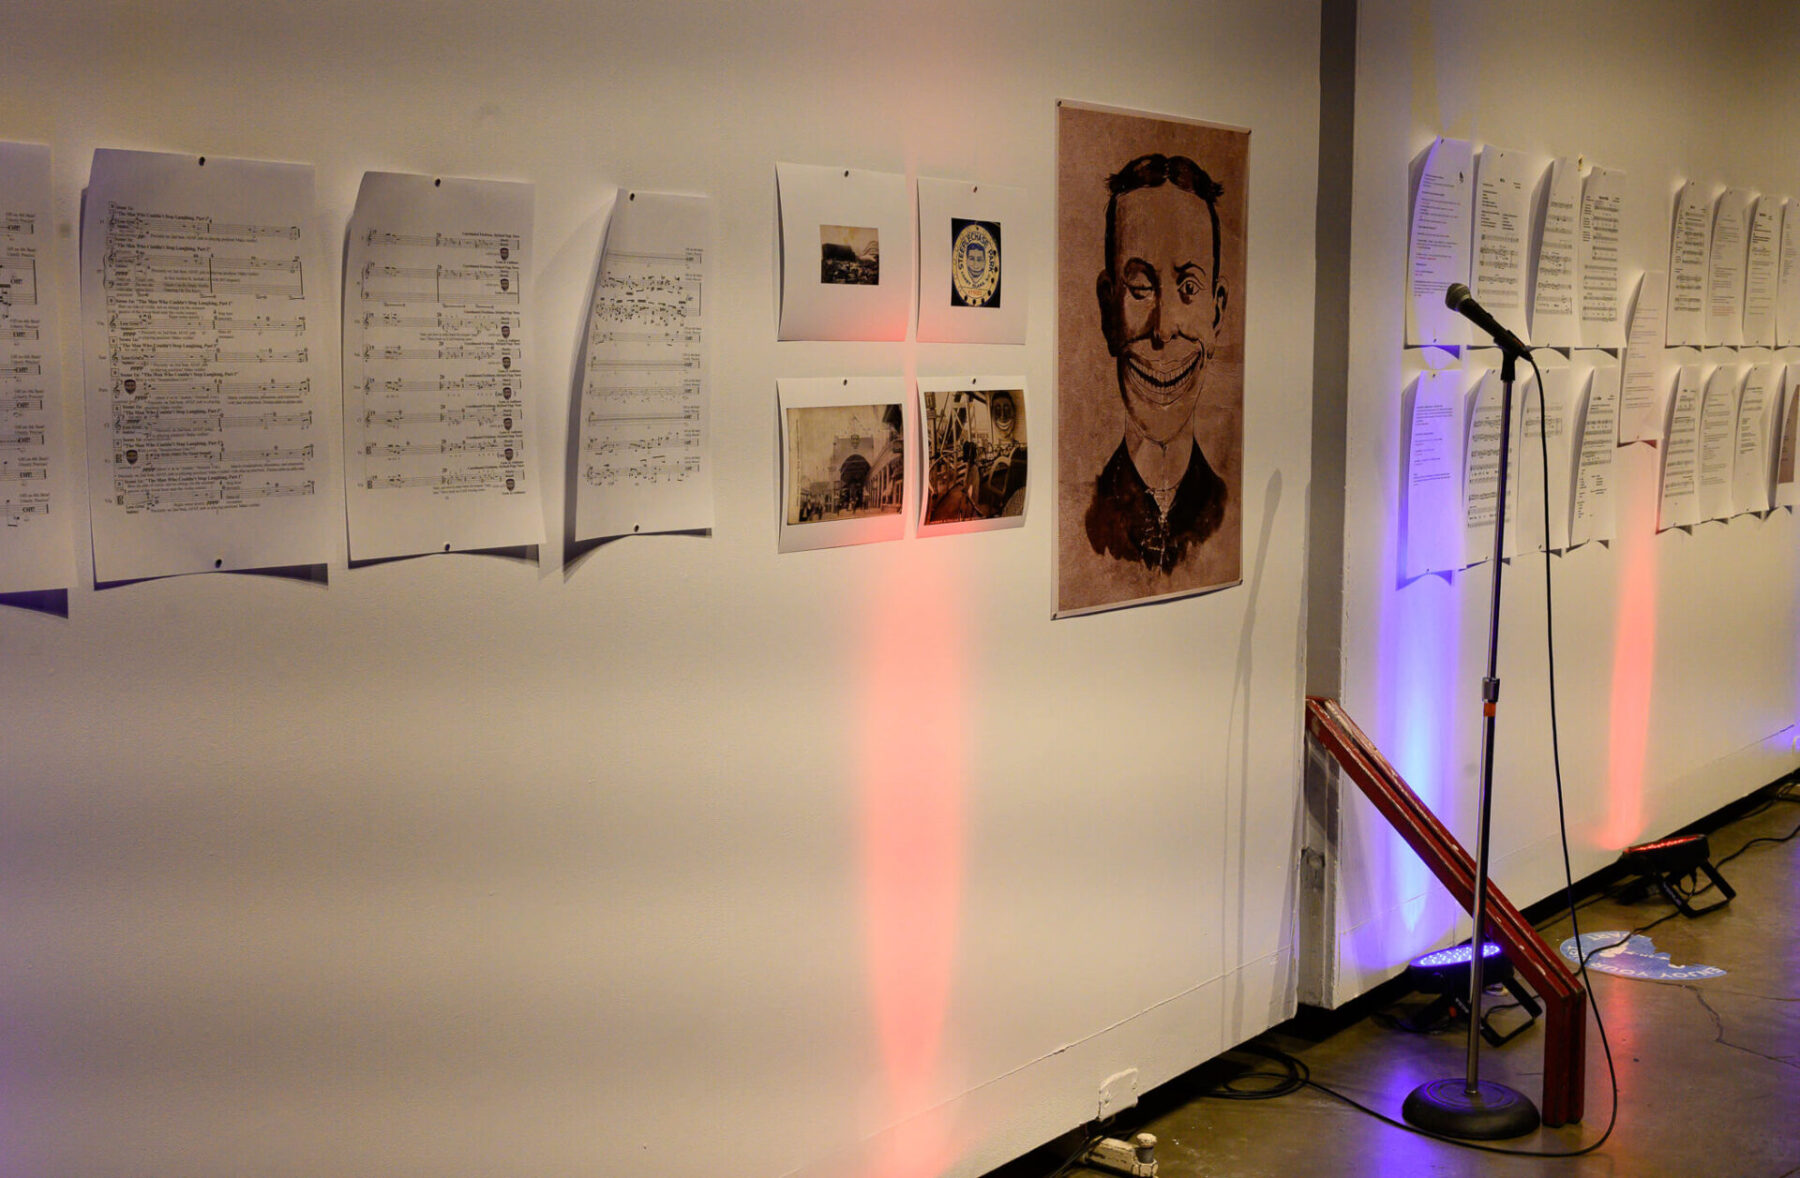 Photo of the gallery wall at the Modulus Festival with scores and images including a creepy sideshow face